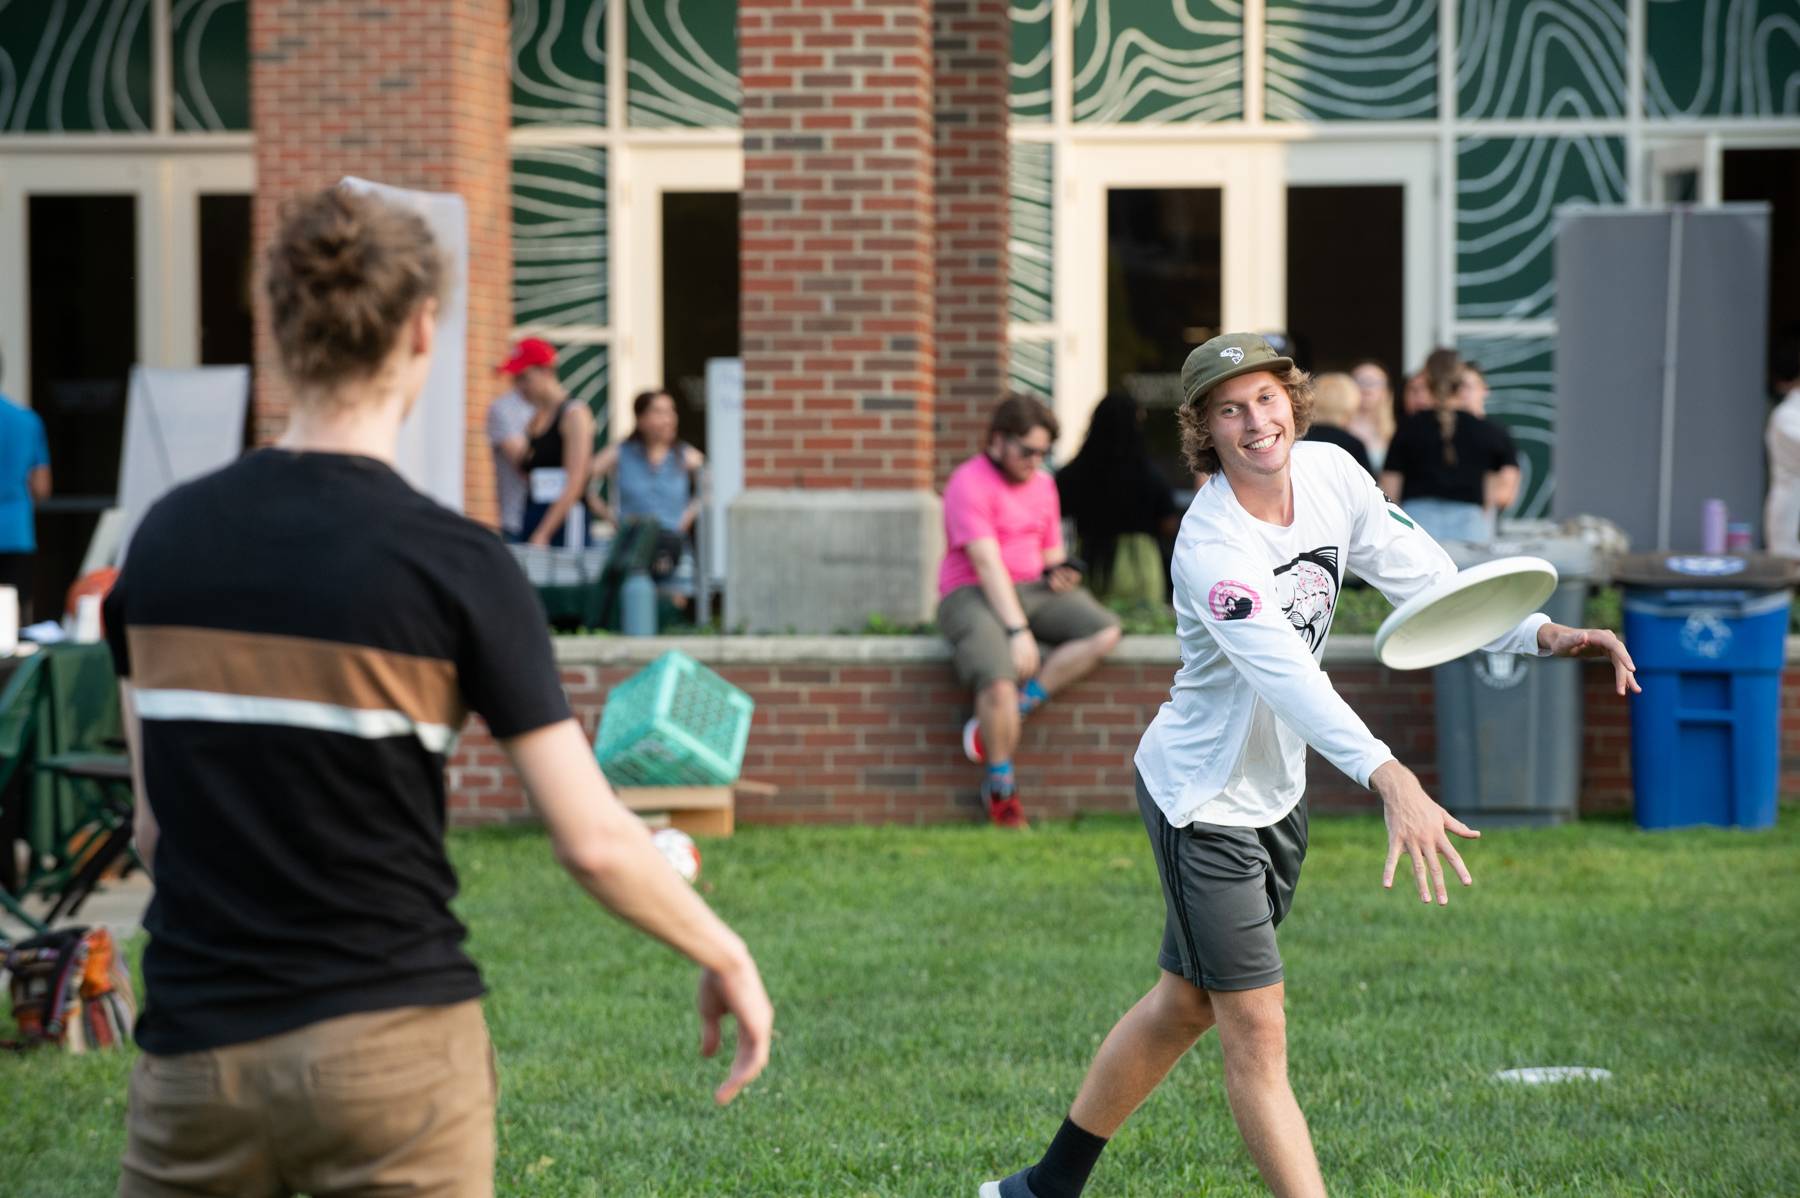 Students enjoy a game of frisbee during Welcome Week.